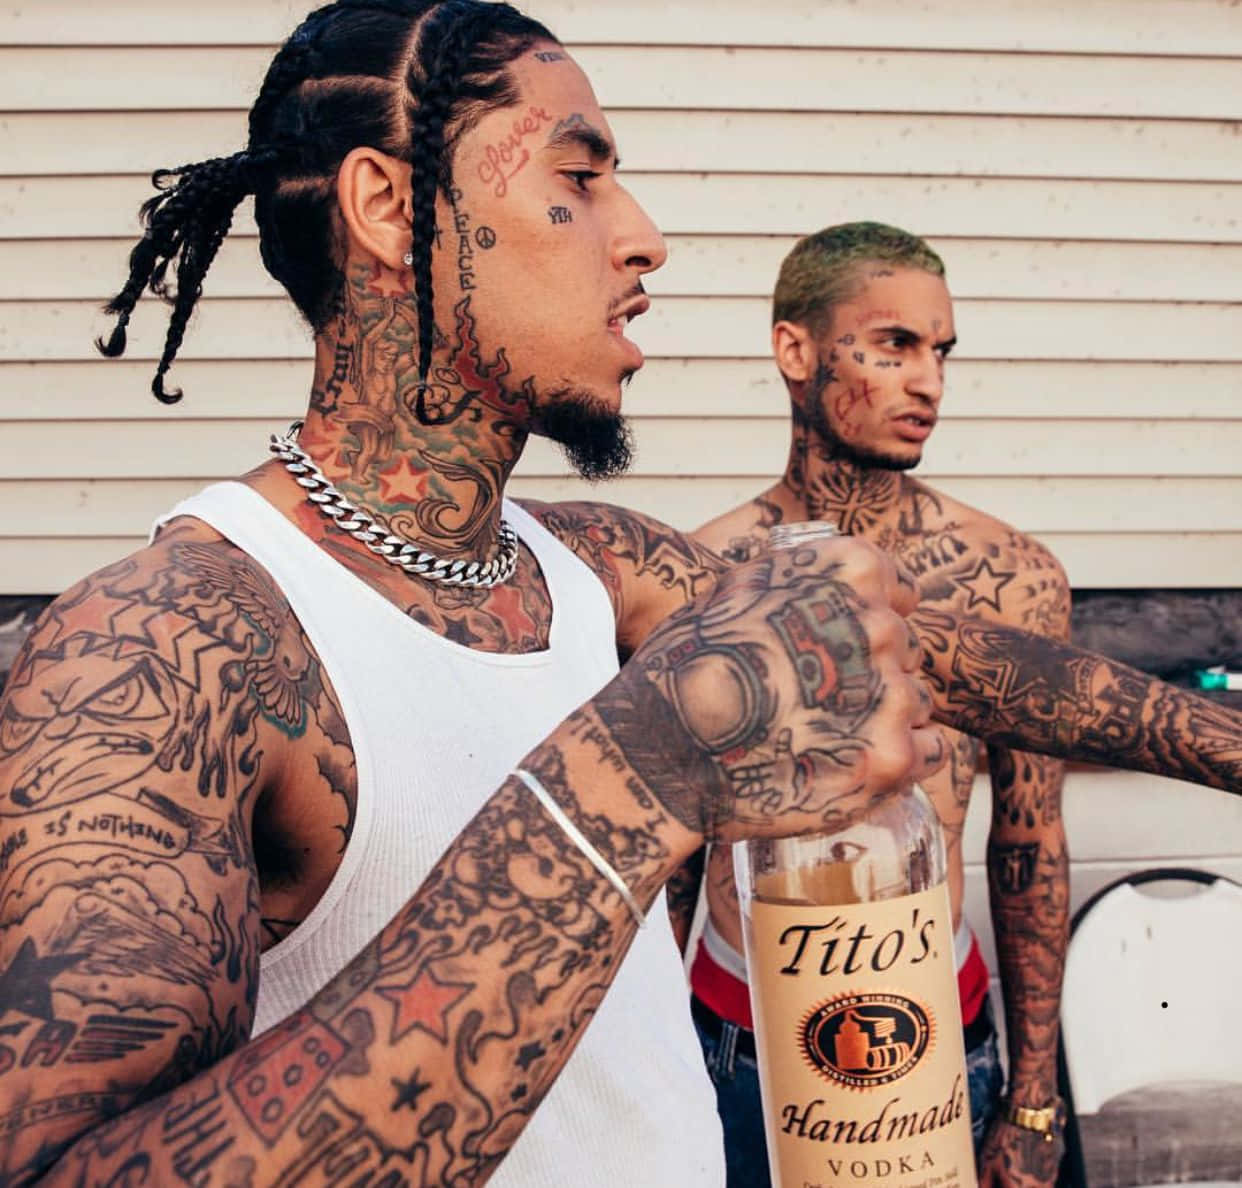 Two Men With Tattoos Standing Next To Each Other